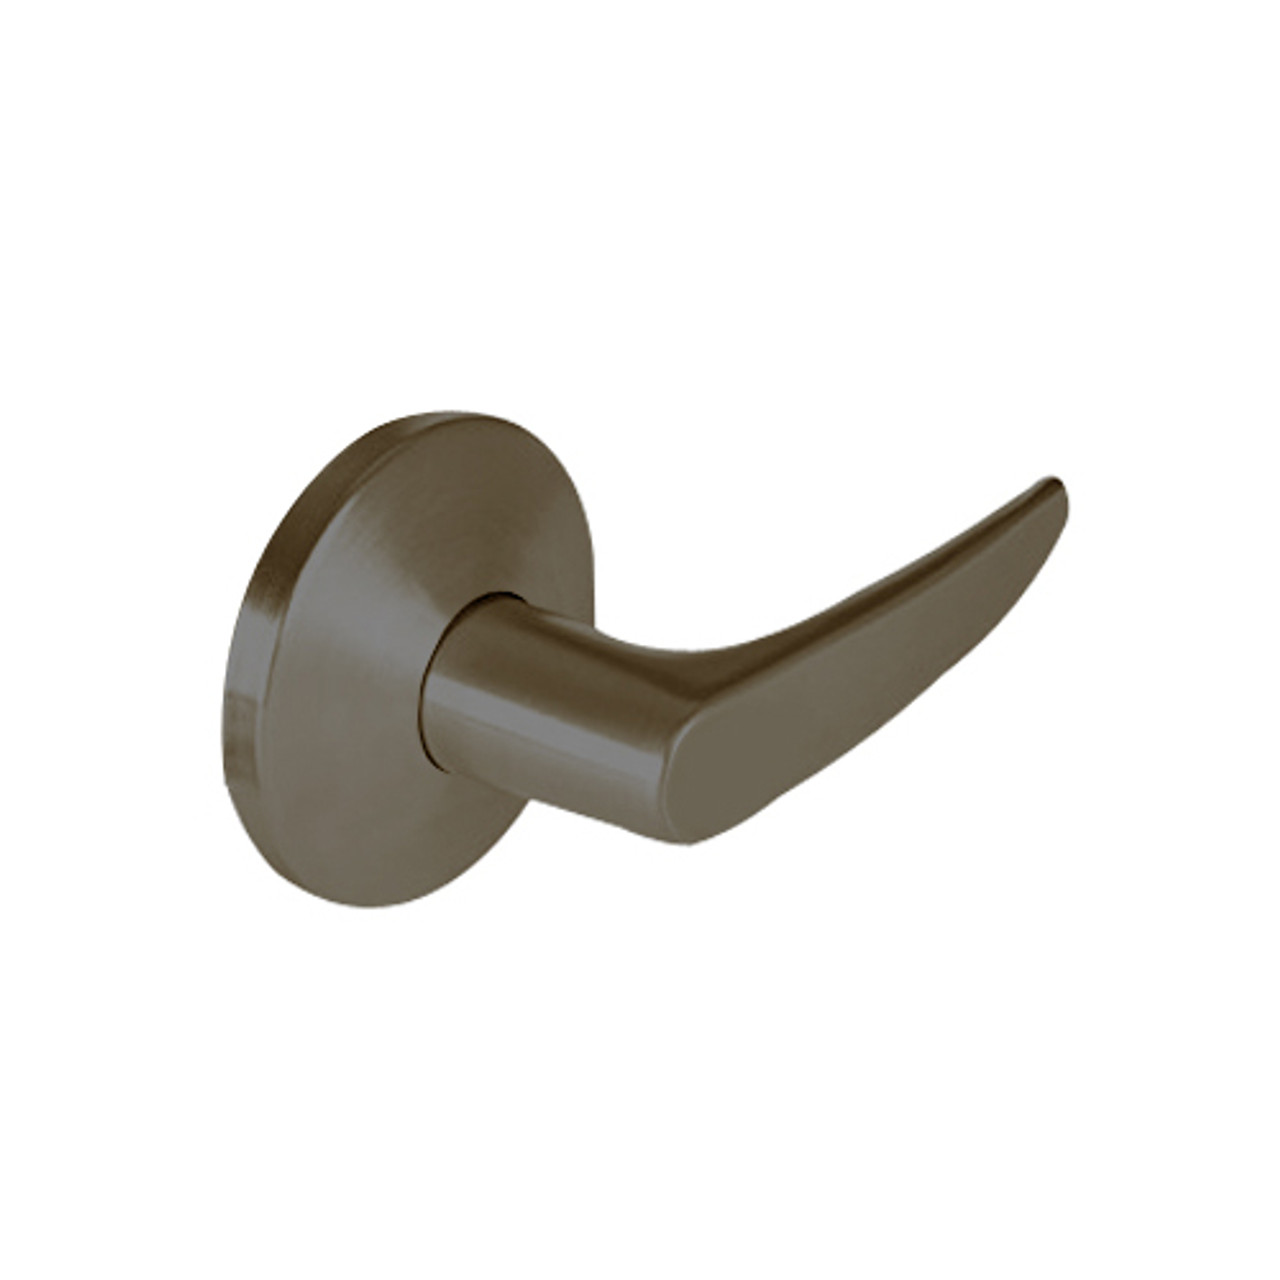 9K30LL16LSTK613 Best 9K Series Hospital Privacy Heavy Duty Cylindrical Lever Locks with Curved Without Return Lever Design in Oil Rubbed Bronze